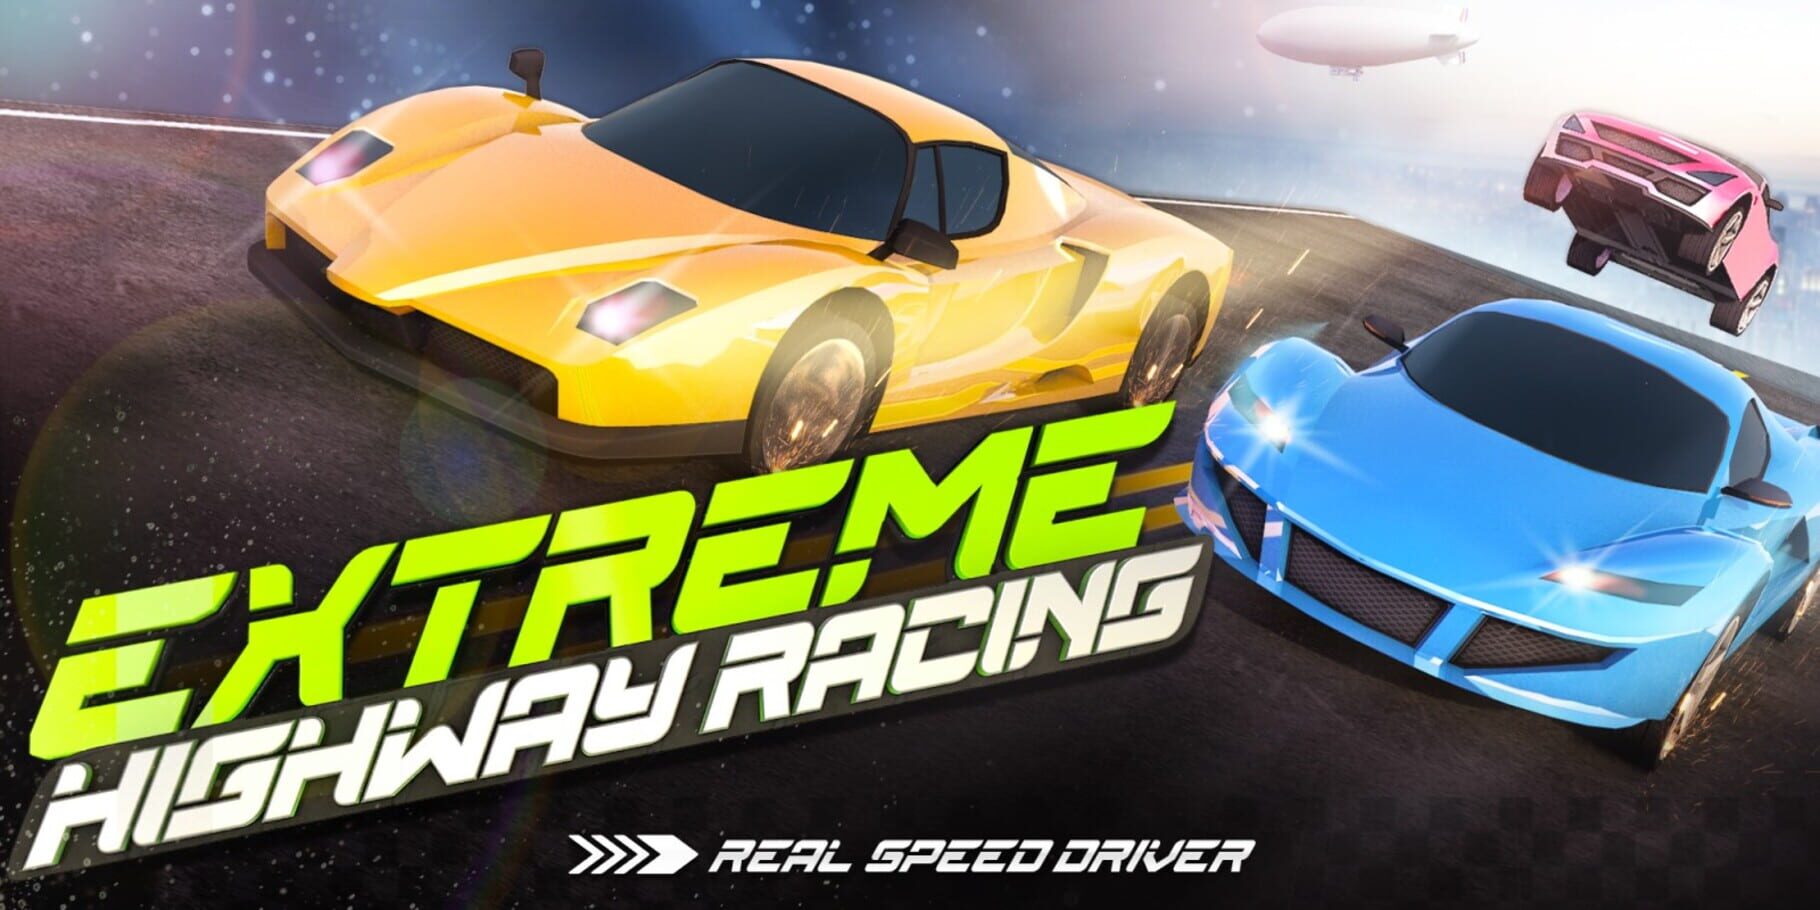 Extreme Highway Racing: Real Speed Driver artwork